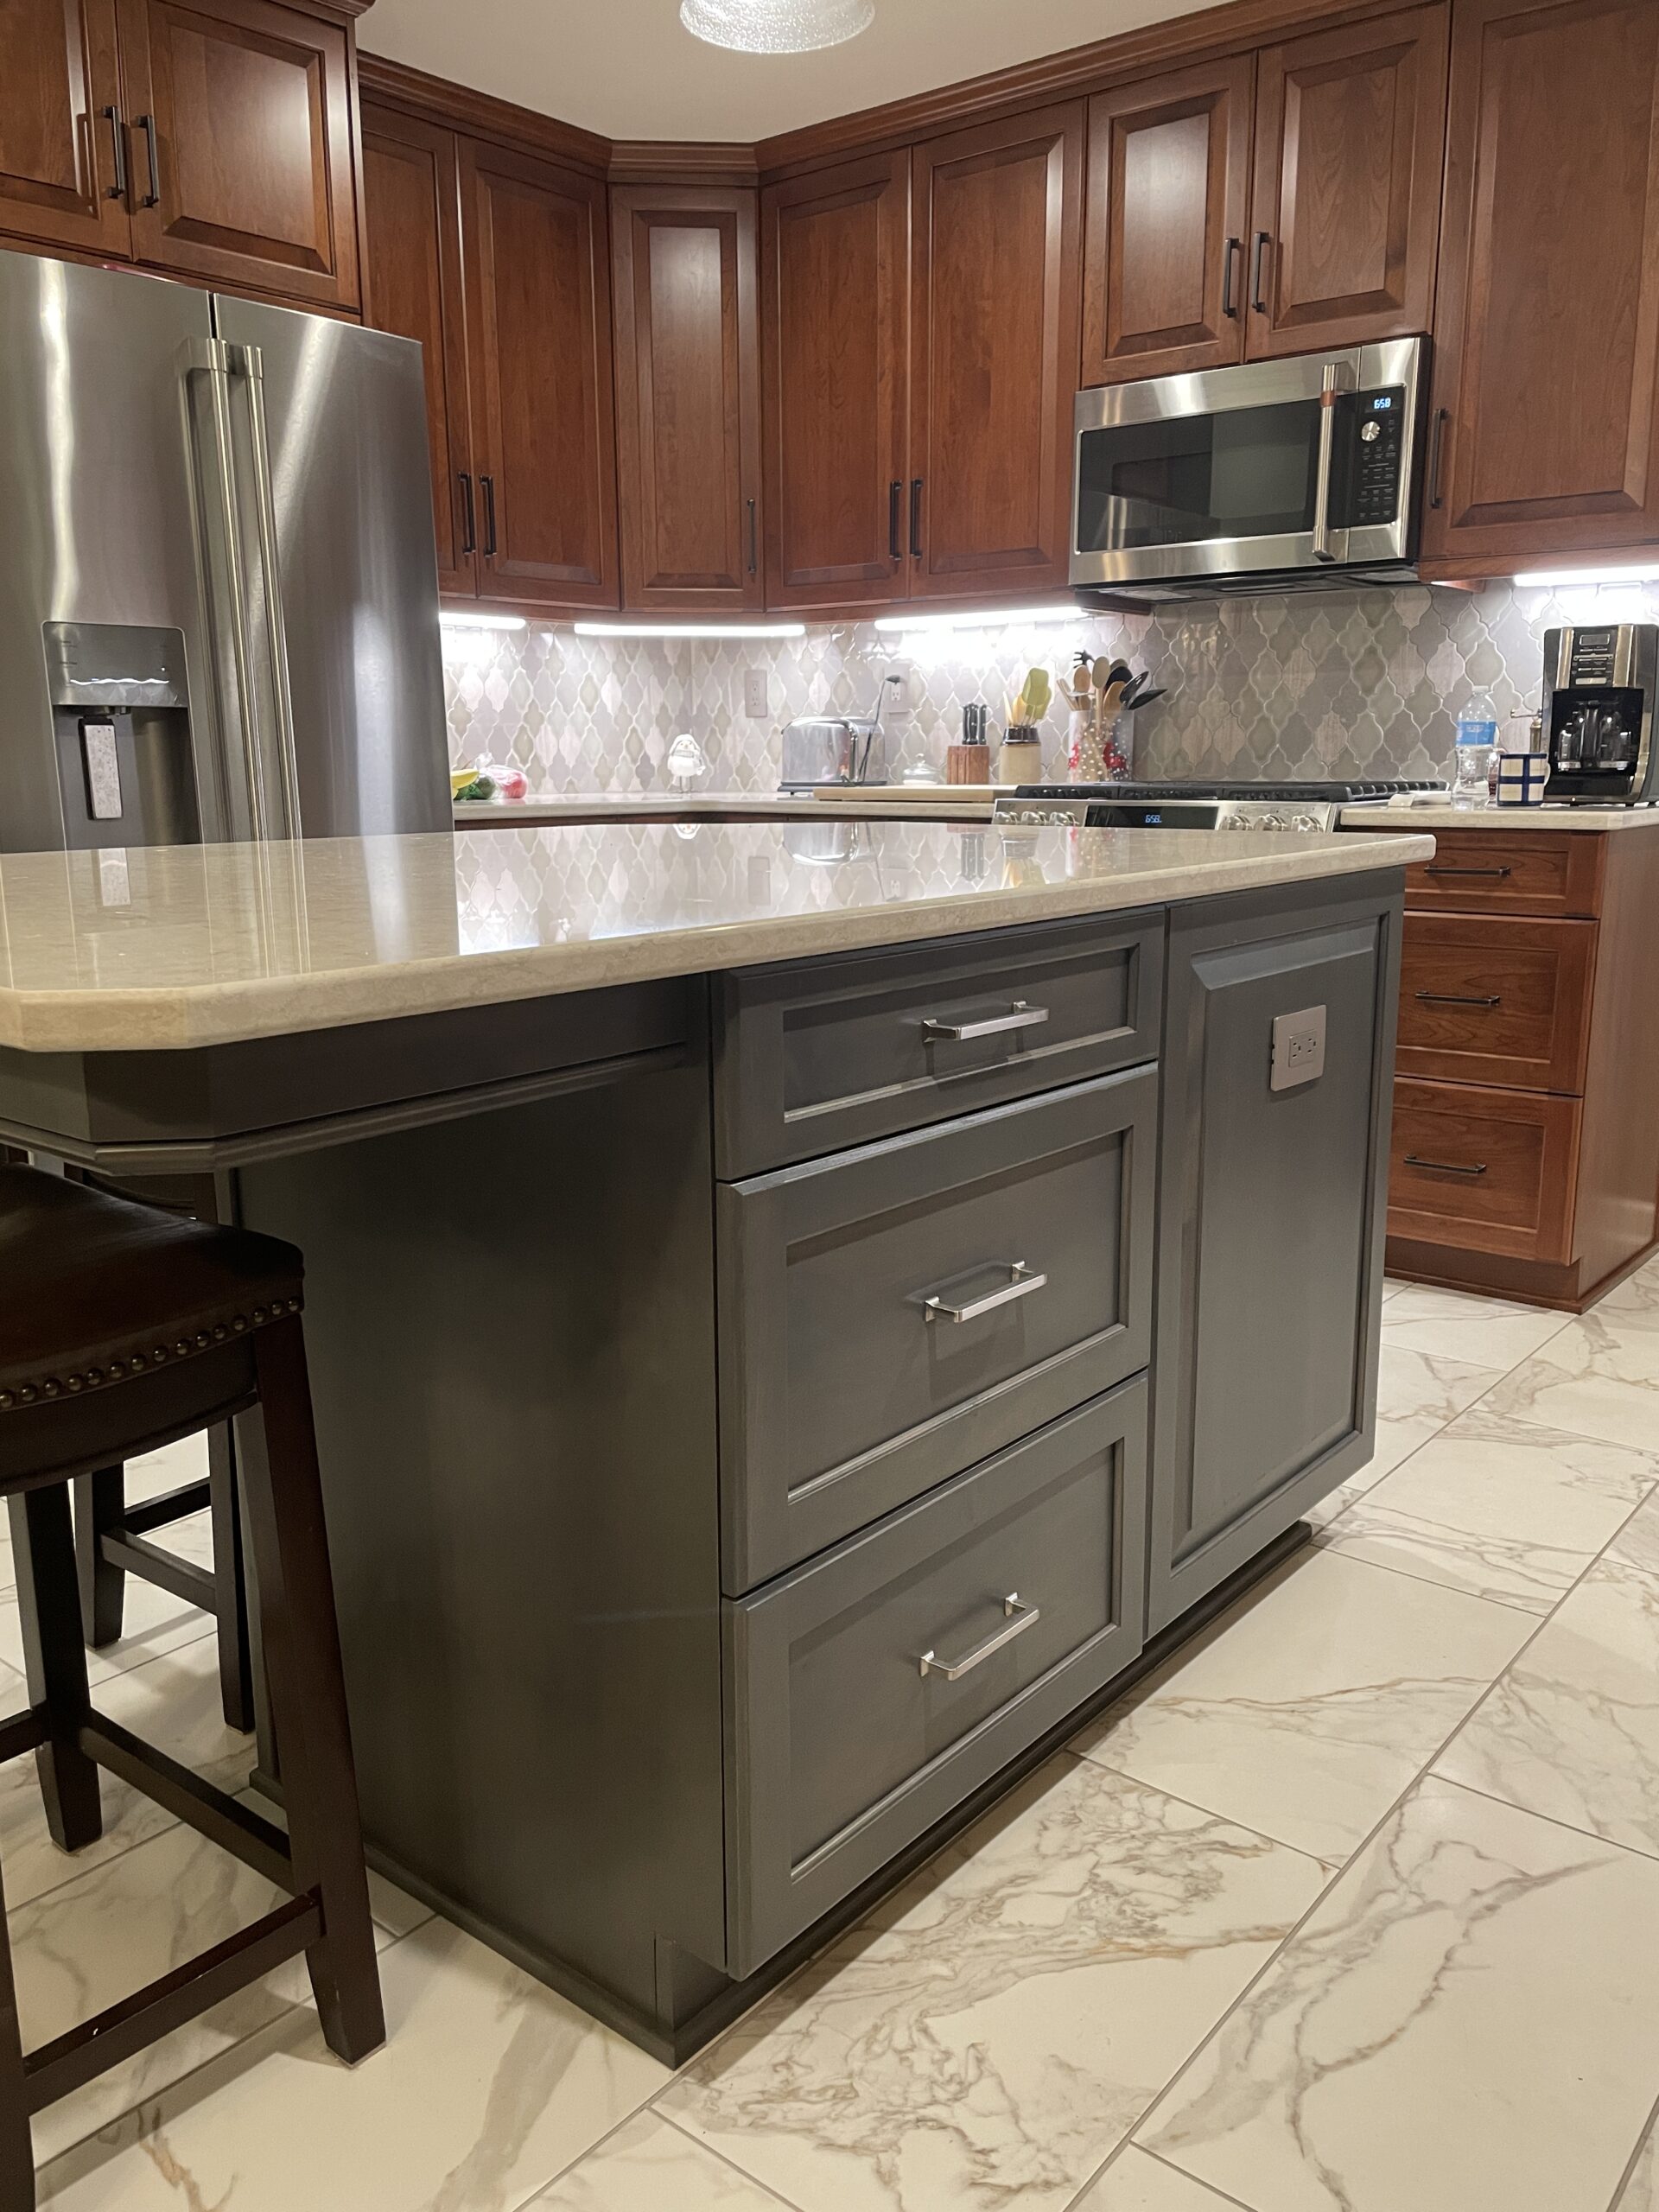 Classic kitchen, center island with white marble countertop, dark island drawers, brown cabinets and storage, arabesque tile backsplash, black and white floor tiles